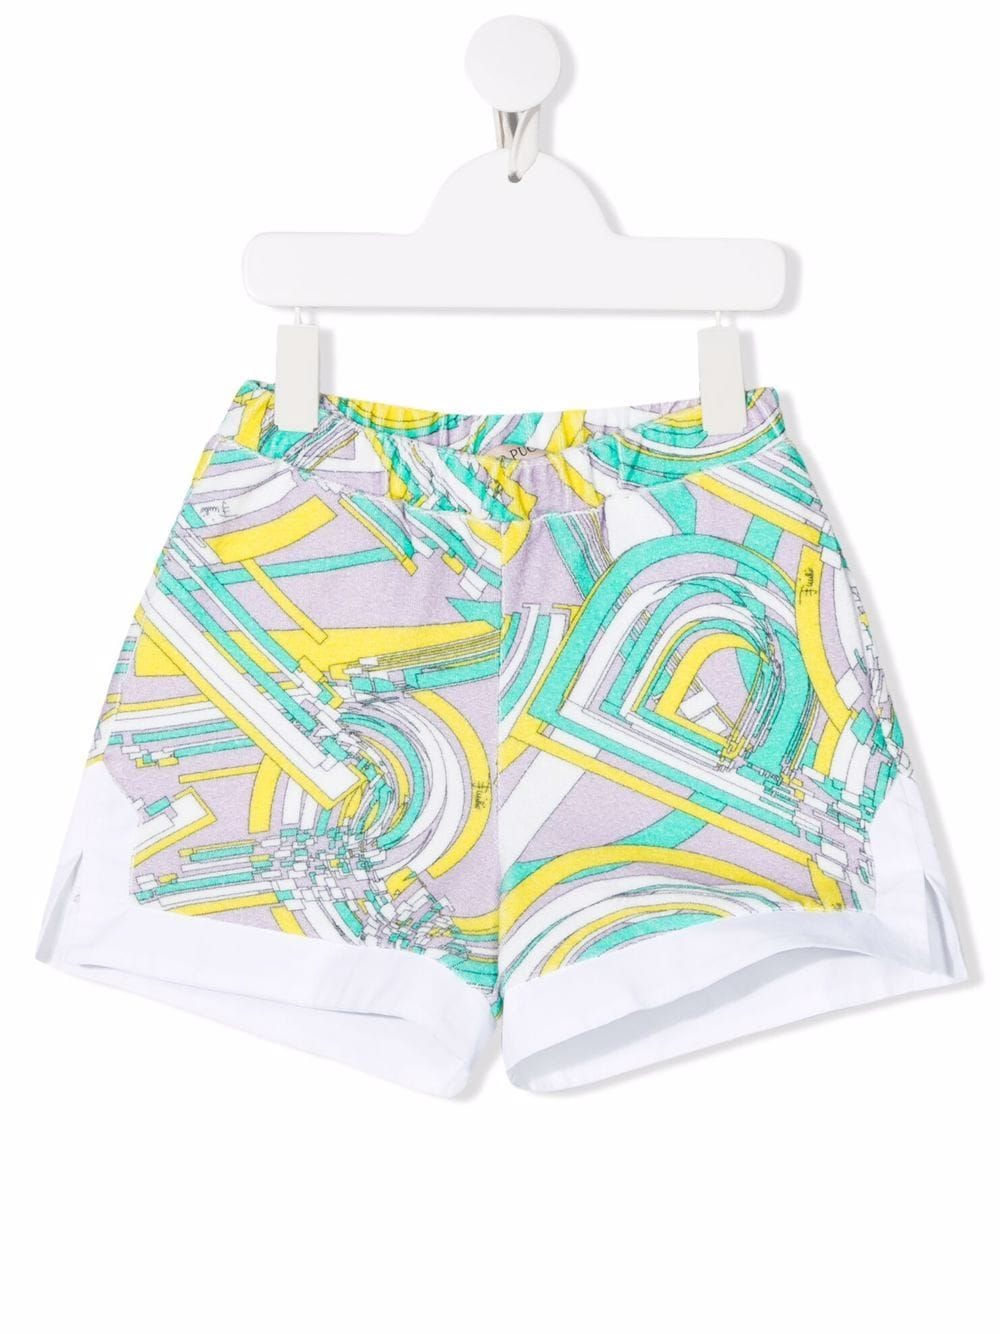 Emilio Pucci Kids Lilac Sports Shorts With Insert Decorated With Yellow And Teal Print